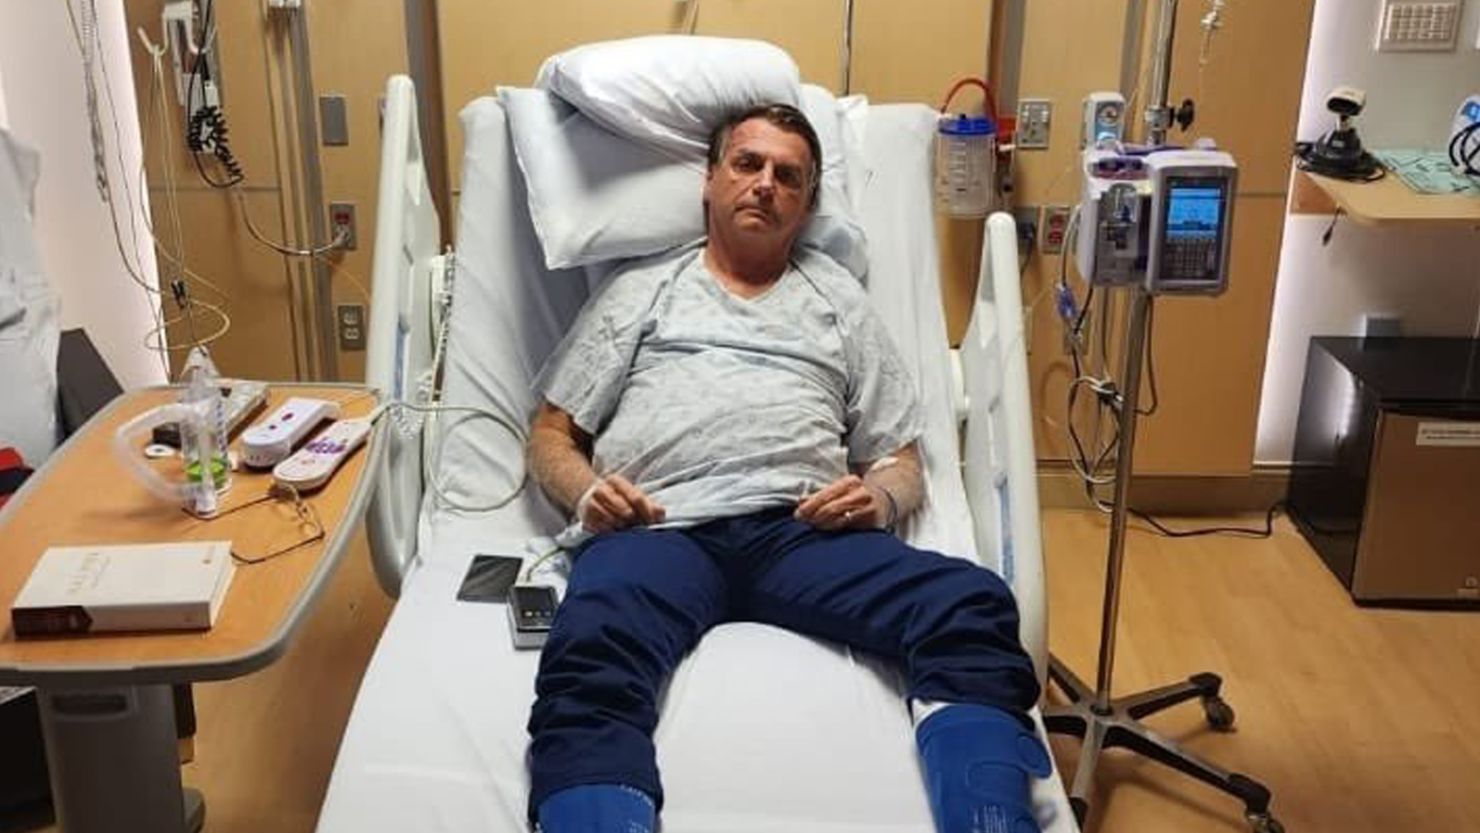 Jair Bolsonaro, former President of Brazil, tweeted a photo of himself from his hospital bed in Orlando.